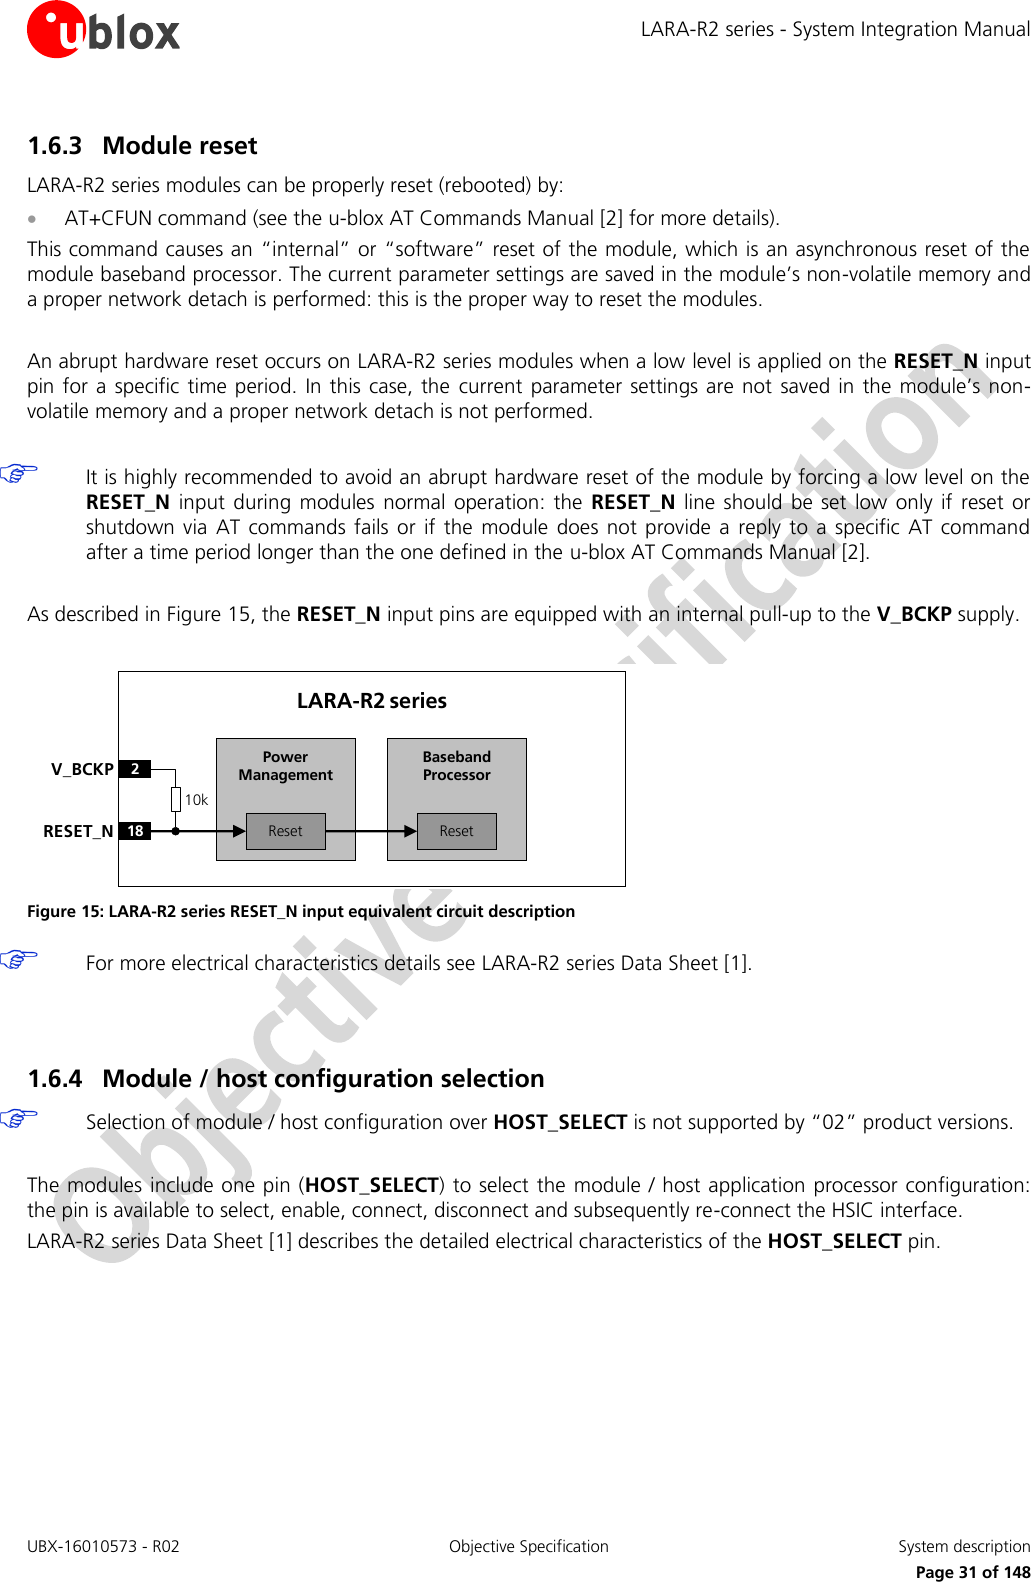 LARA-R2 series - System Integration Manual UBX-16010573 - R02  Objective Specification  System description     Page 31 of 148 1.6.3 Module reset LARA-R2 series modules can be properly reset (rebooted) by:  AT+CFUN command (see the u-blox AT Commands Manual [2] for more details). This command causes an “internal” or “software” reset of the module, which is an asynchronous reset of the module baseband processor. The current parameter settings are saved in the module’s non-volatile memory and a proper network detach is performed: this is the proper way to reset the modules.  An abrupt hardware reset occurs on LARA-R2 series modules when a low level is applied on the RESET_N input pin for a  specific time  period.  In this case, the  current parameter  settings are not  saved in  the  module’s  non-volatile memory and a proper network detach is not performed.   It is highly recommended to avoid an abrupt hardware reset of the module by forcing a low level on the RESET_N  input  during  modules  normal  operation:  the  RESET_N  line  should  be set  low  only  if  reset  or shutdown  via  AT  commands  fails  or  if  the  module  does  not  provide  a  reply  to  a  specific  AT  command after a time period longer than the one defined in the u-blox AT Commands Manual [2].  As described in Figure 15, the RESET_N input pins are equipped with an internal pull-up to the V_BCKP supply.  Baseband Processor18RESET_NLARA-R2 series2V_BCKPResetPower ManagementReset10k Figure 15: LARA-R2 series RESET_N input equivalent circuit description  For more electrical characteristics details see LARA-R2 series Data Sheet [1].   1.6.4 Module / host configuration selection   Selection of module / host configuration over HOST_SELECT is not supported by “02” product versions.  The modules include one pin (HOST_SELECT) to select the  module / host application processor configuration: the pin is available to select, enable, connect, disconnect and subsequently re-connect the HSIC interface. LARA-R2 series Data Sheet [1] describes the detailed electrical characteristics of the HOST_SELECT pin.   